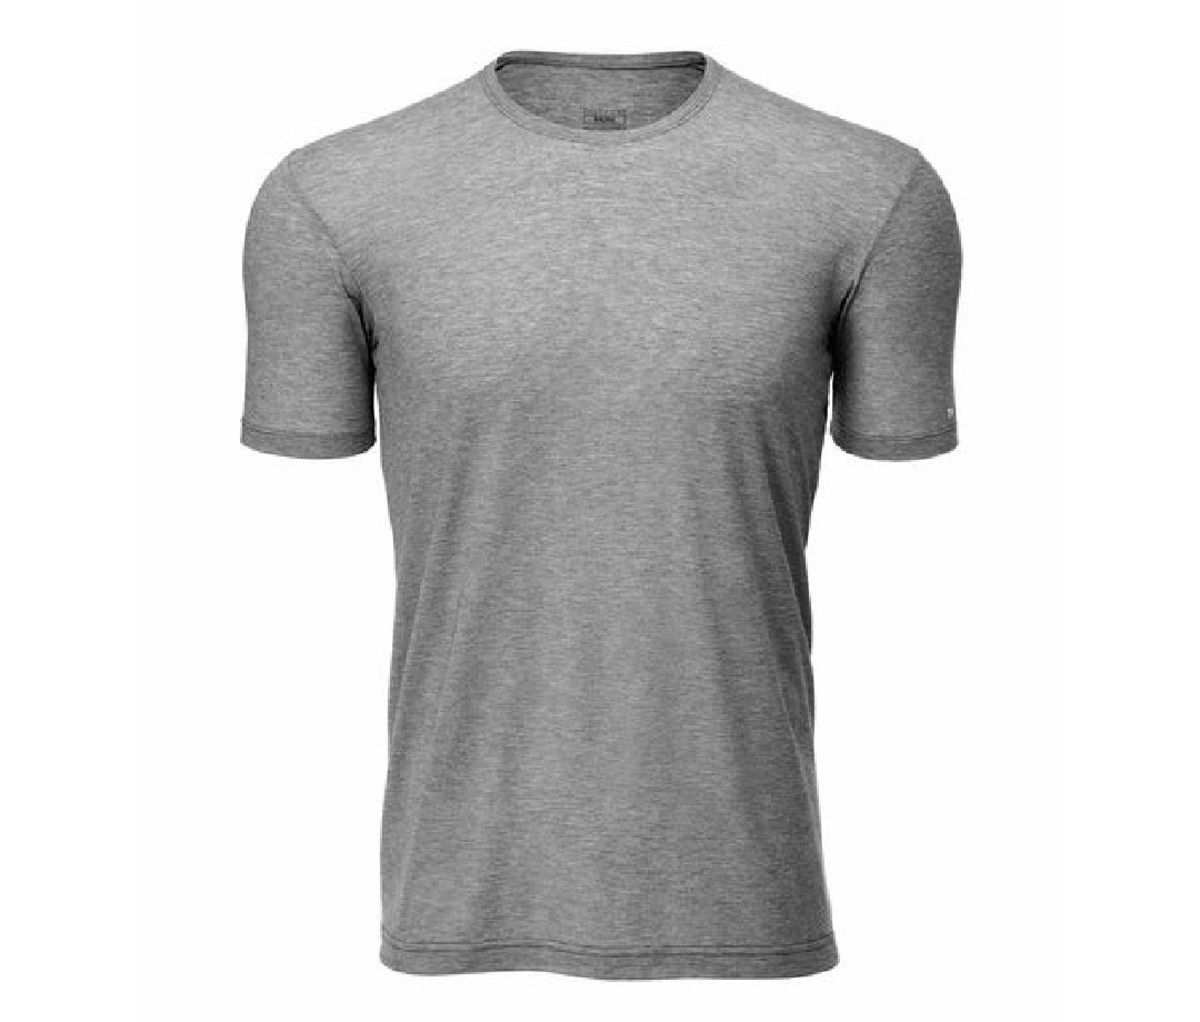 An image of a gray 7Mesh Elevate short sleeve cycling shirt.